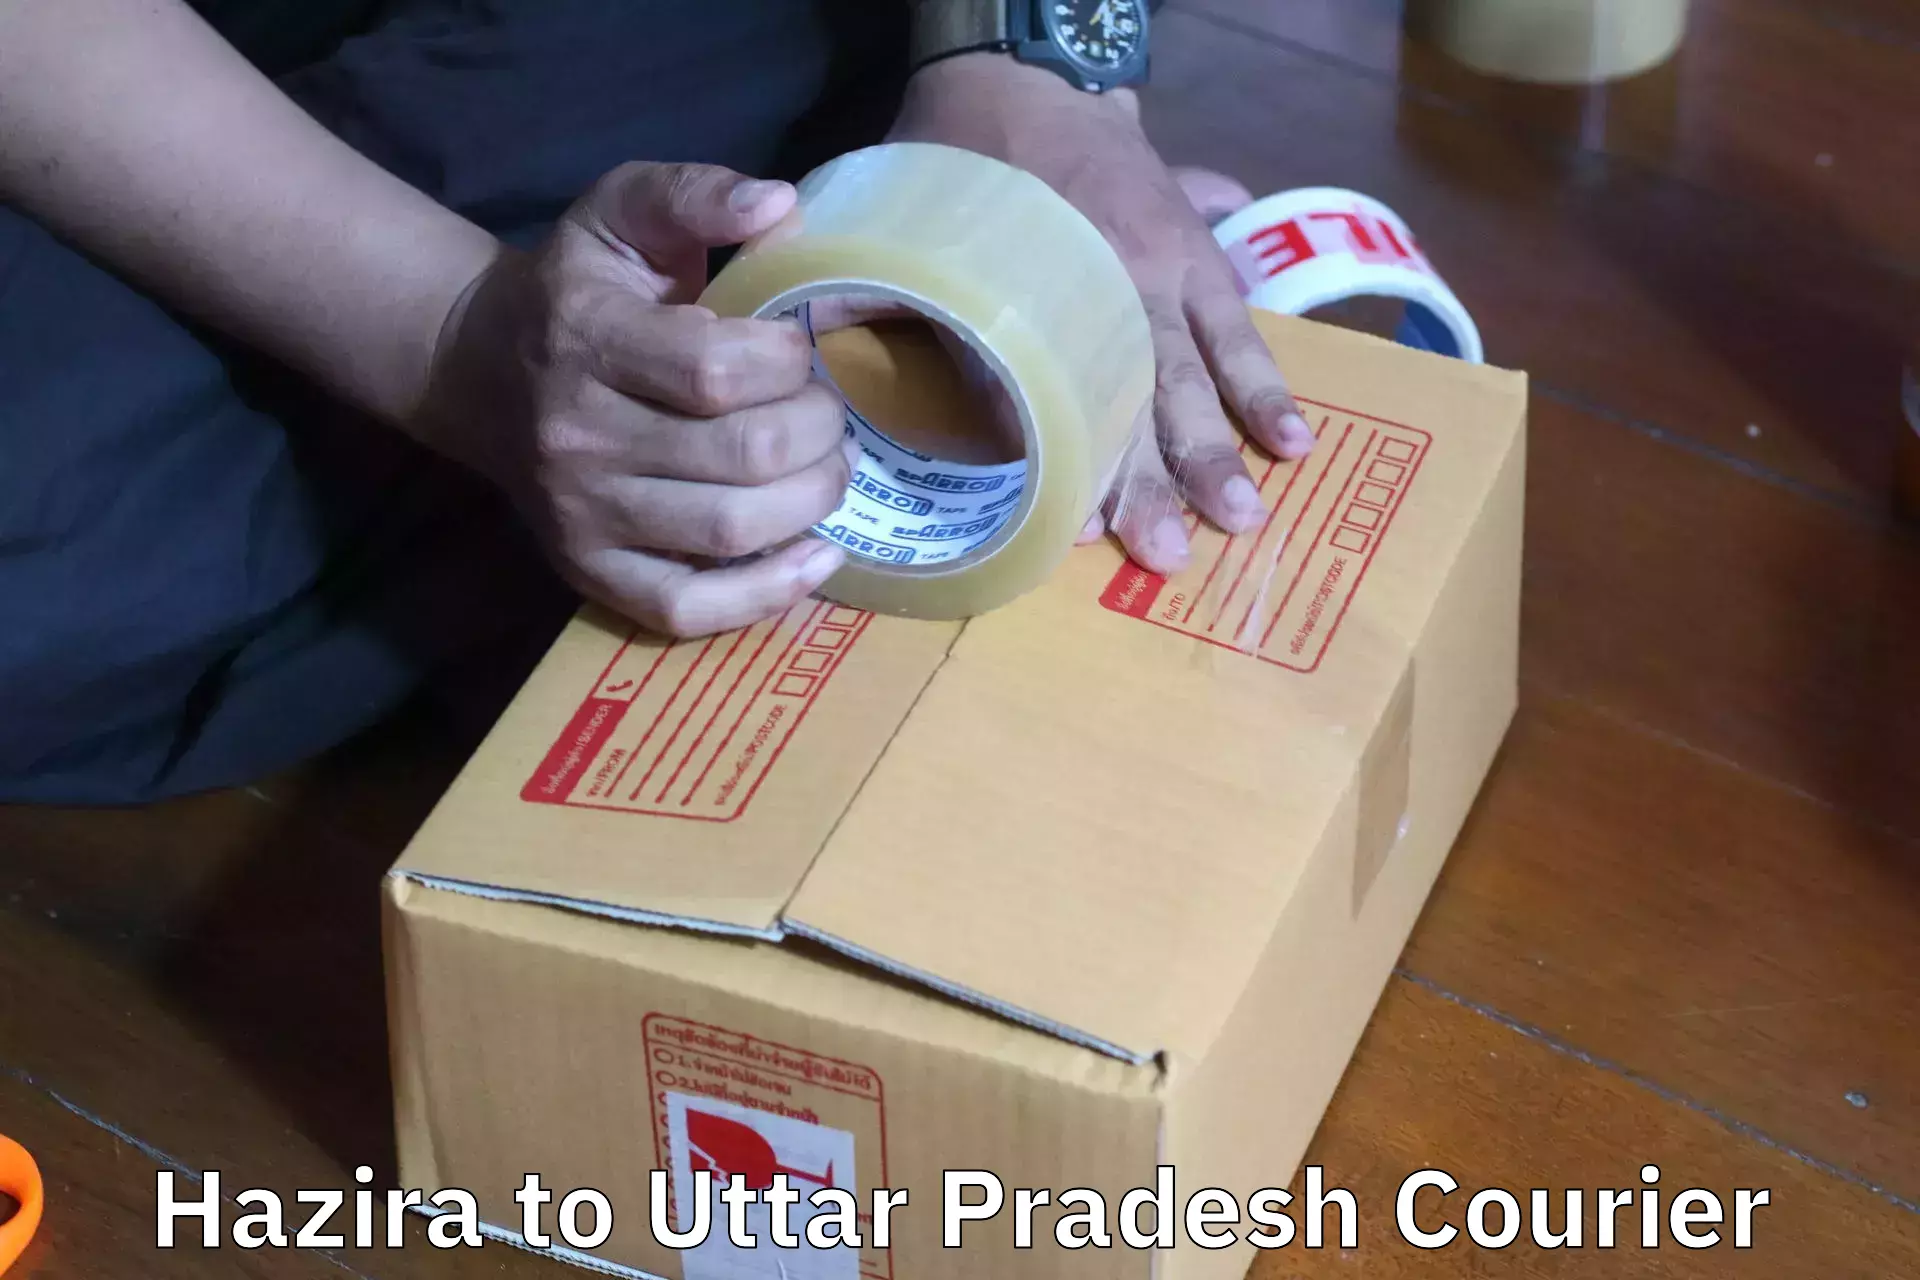 Home goods moving company Hazira to Rajesultanpur